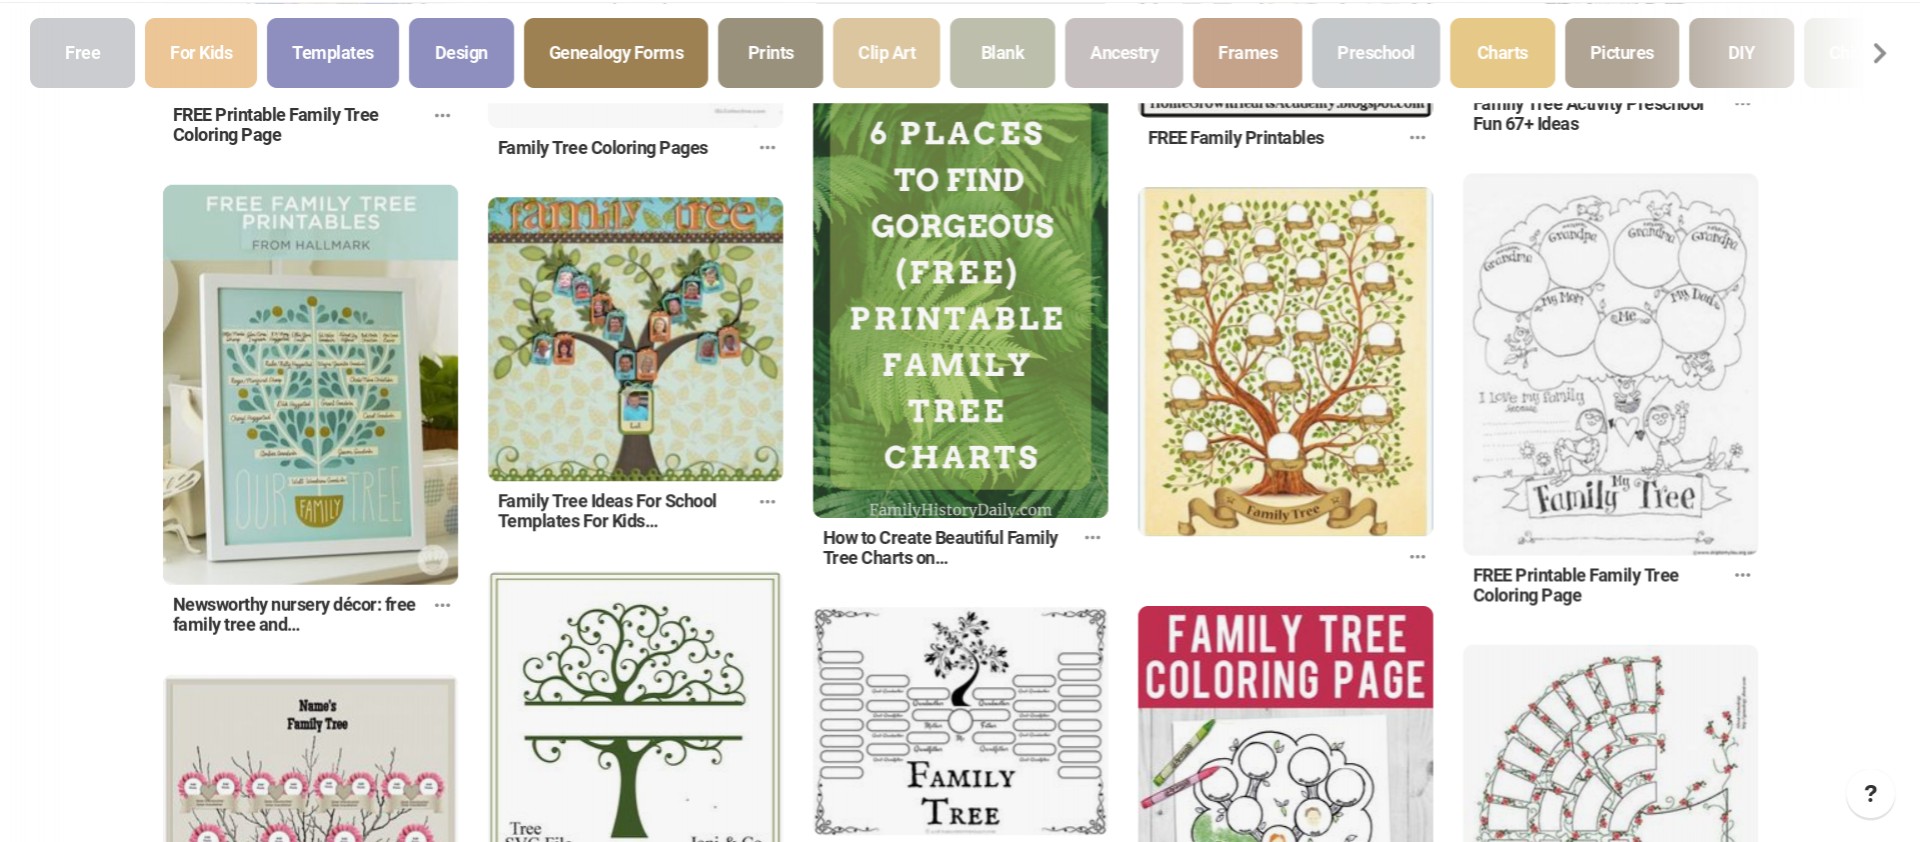 046 Free Printable Family Tree Template Or Make Easily With.